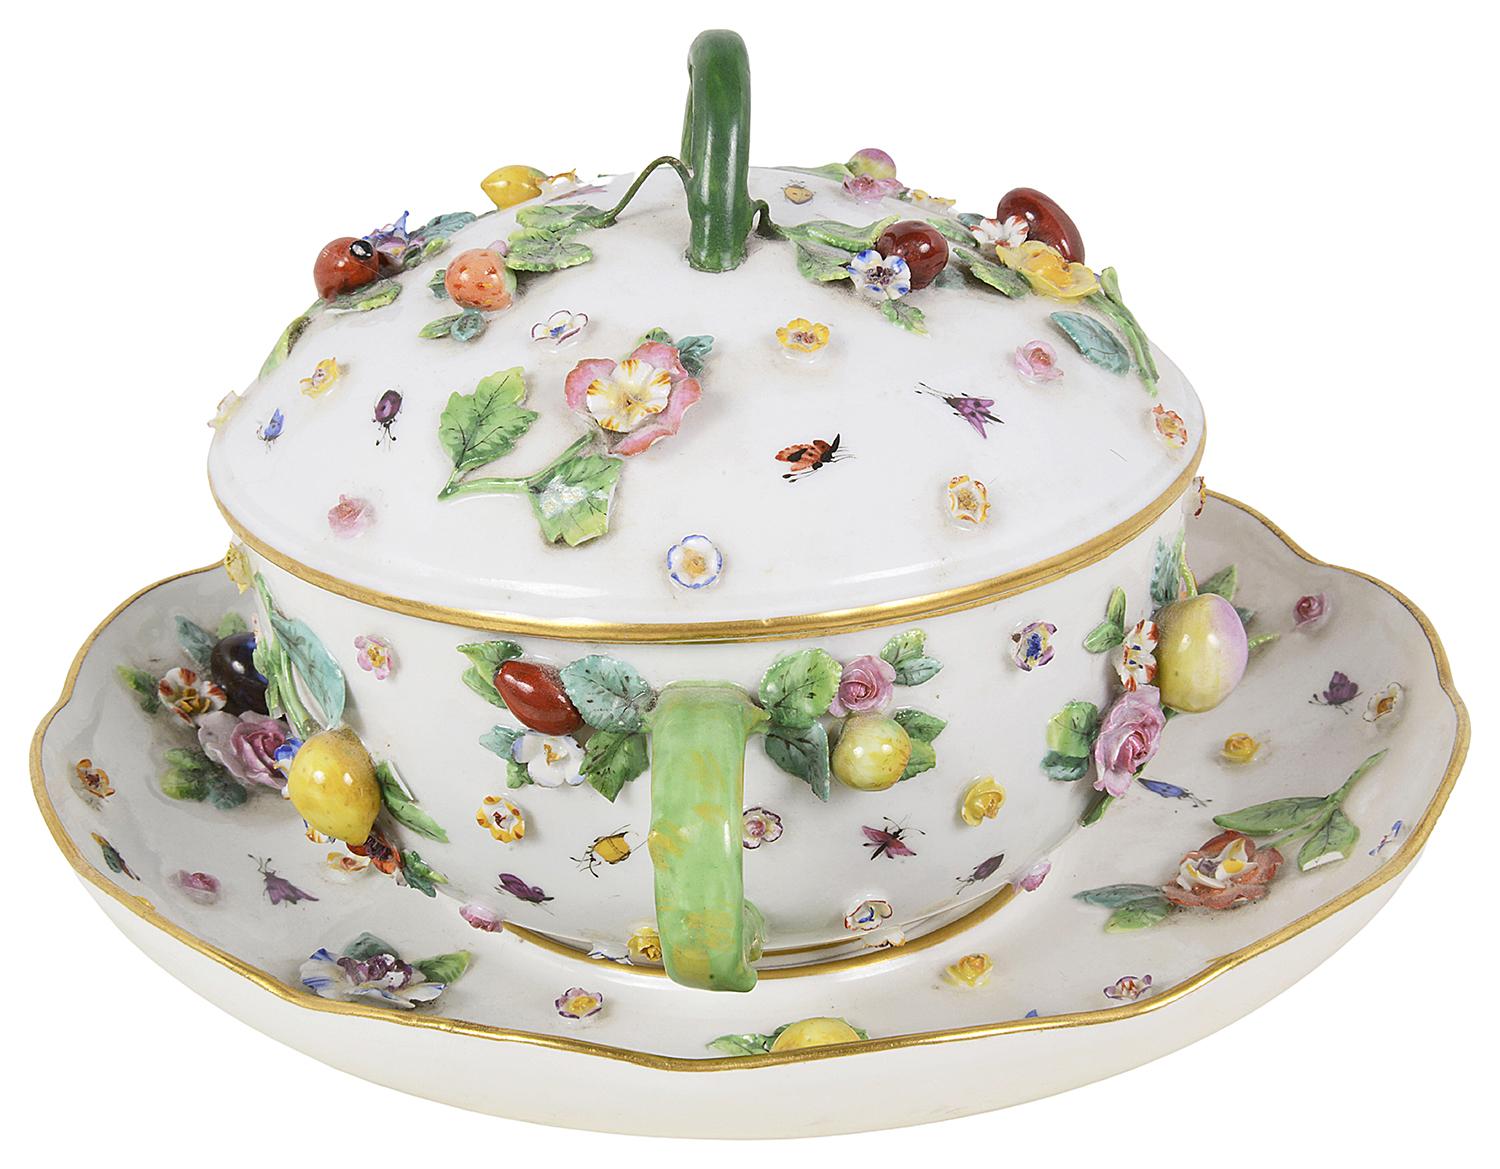 A fine quality 19th century Meissen Porcelain lidded tureen, having wonderful bold coloured raised floral decoration, berries and insects.
Underglaze blue cross swords to the underside.